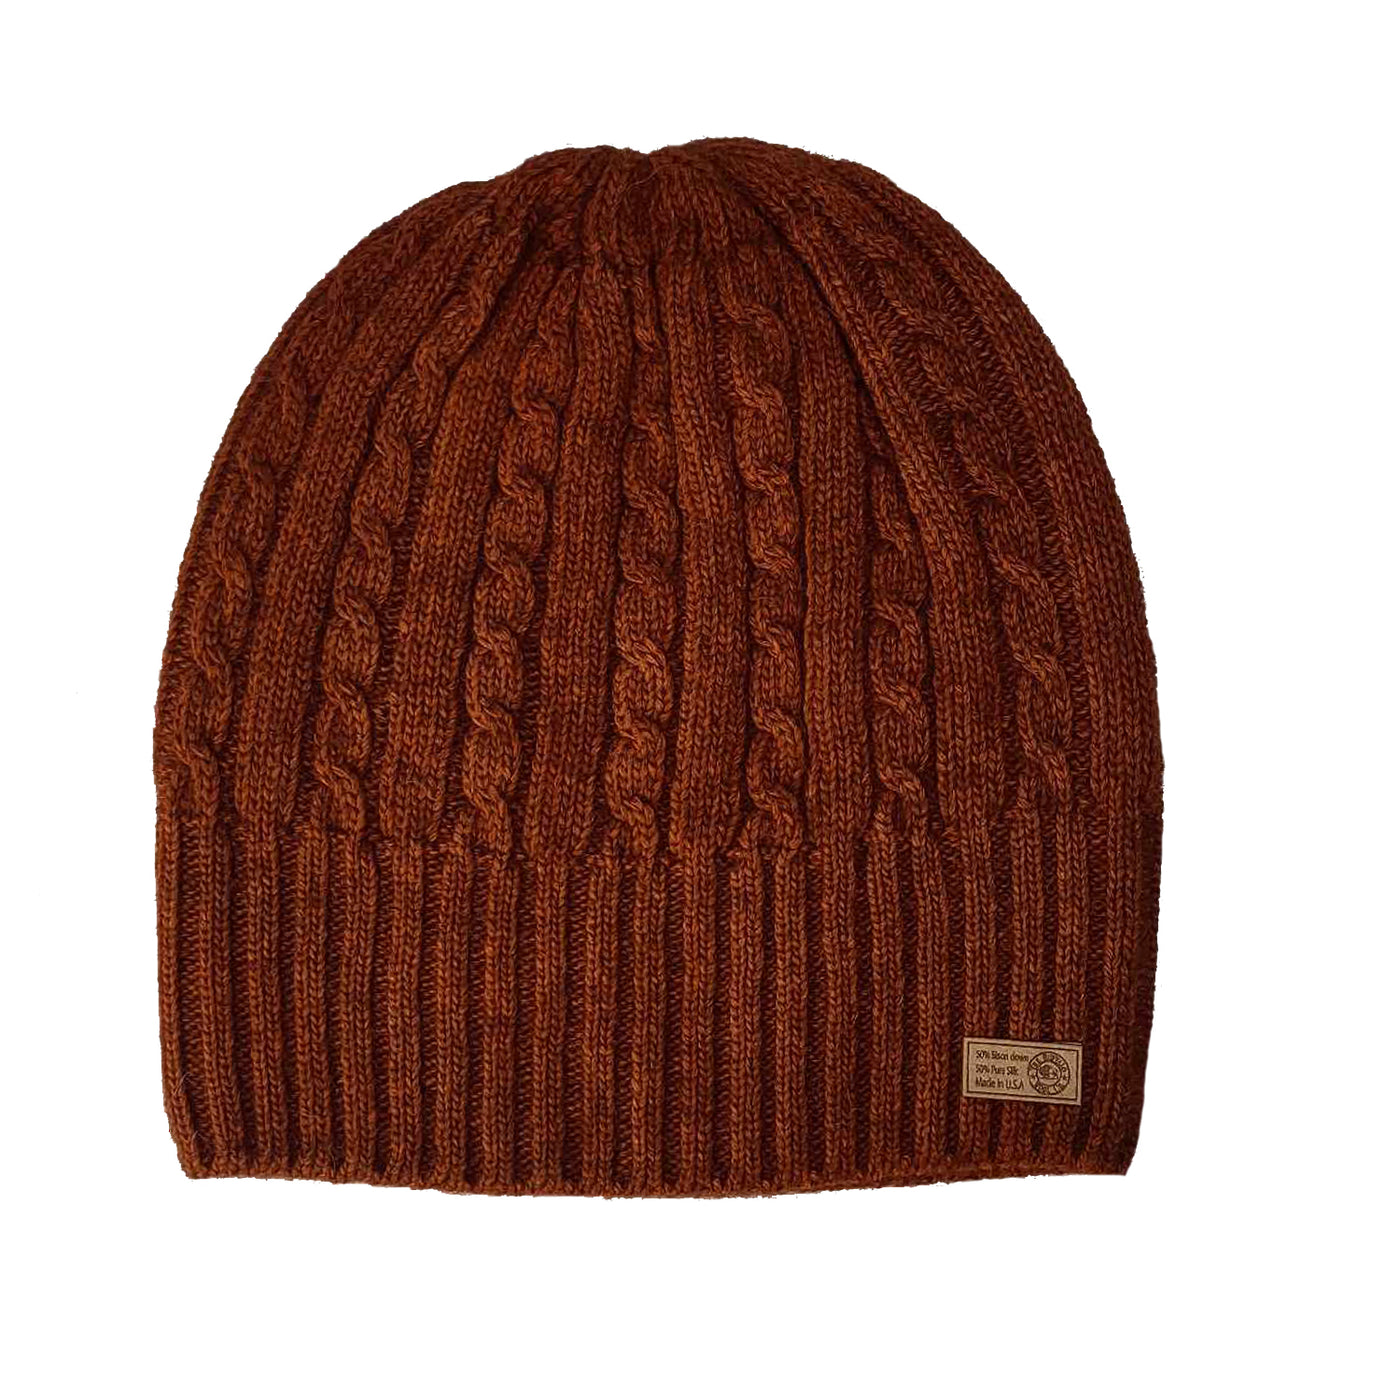 Bison Beanie Cabled